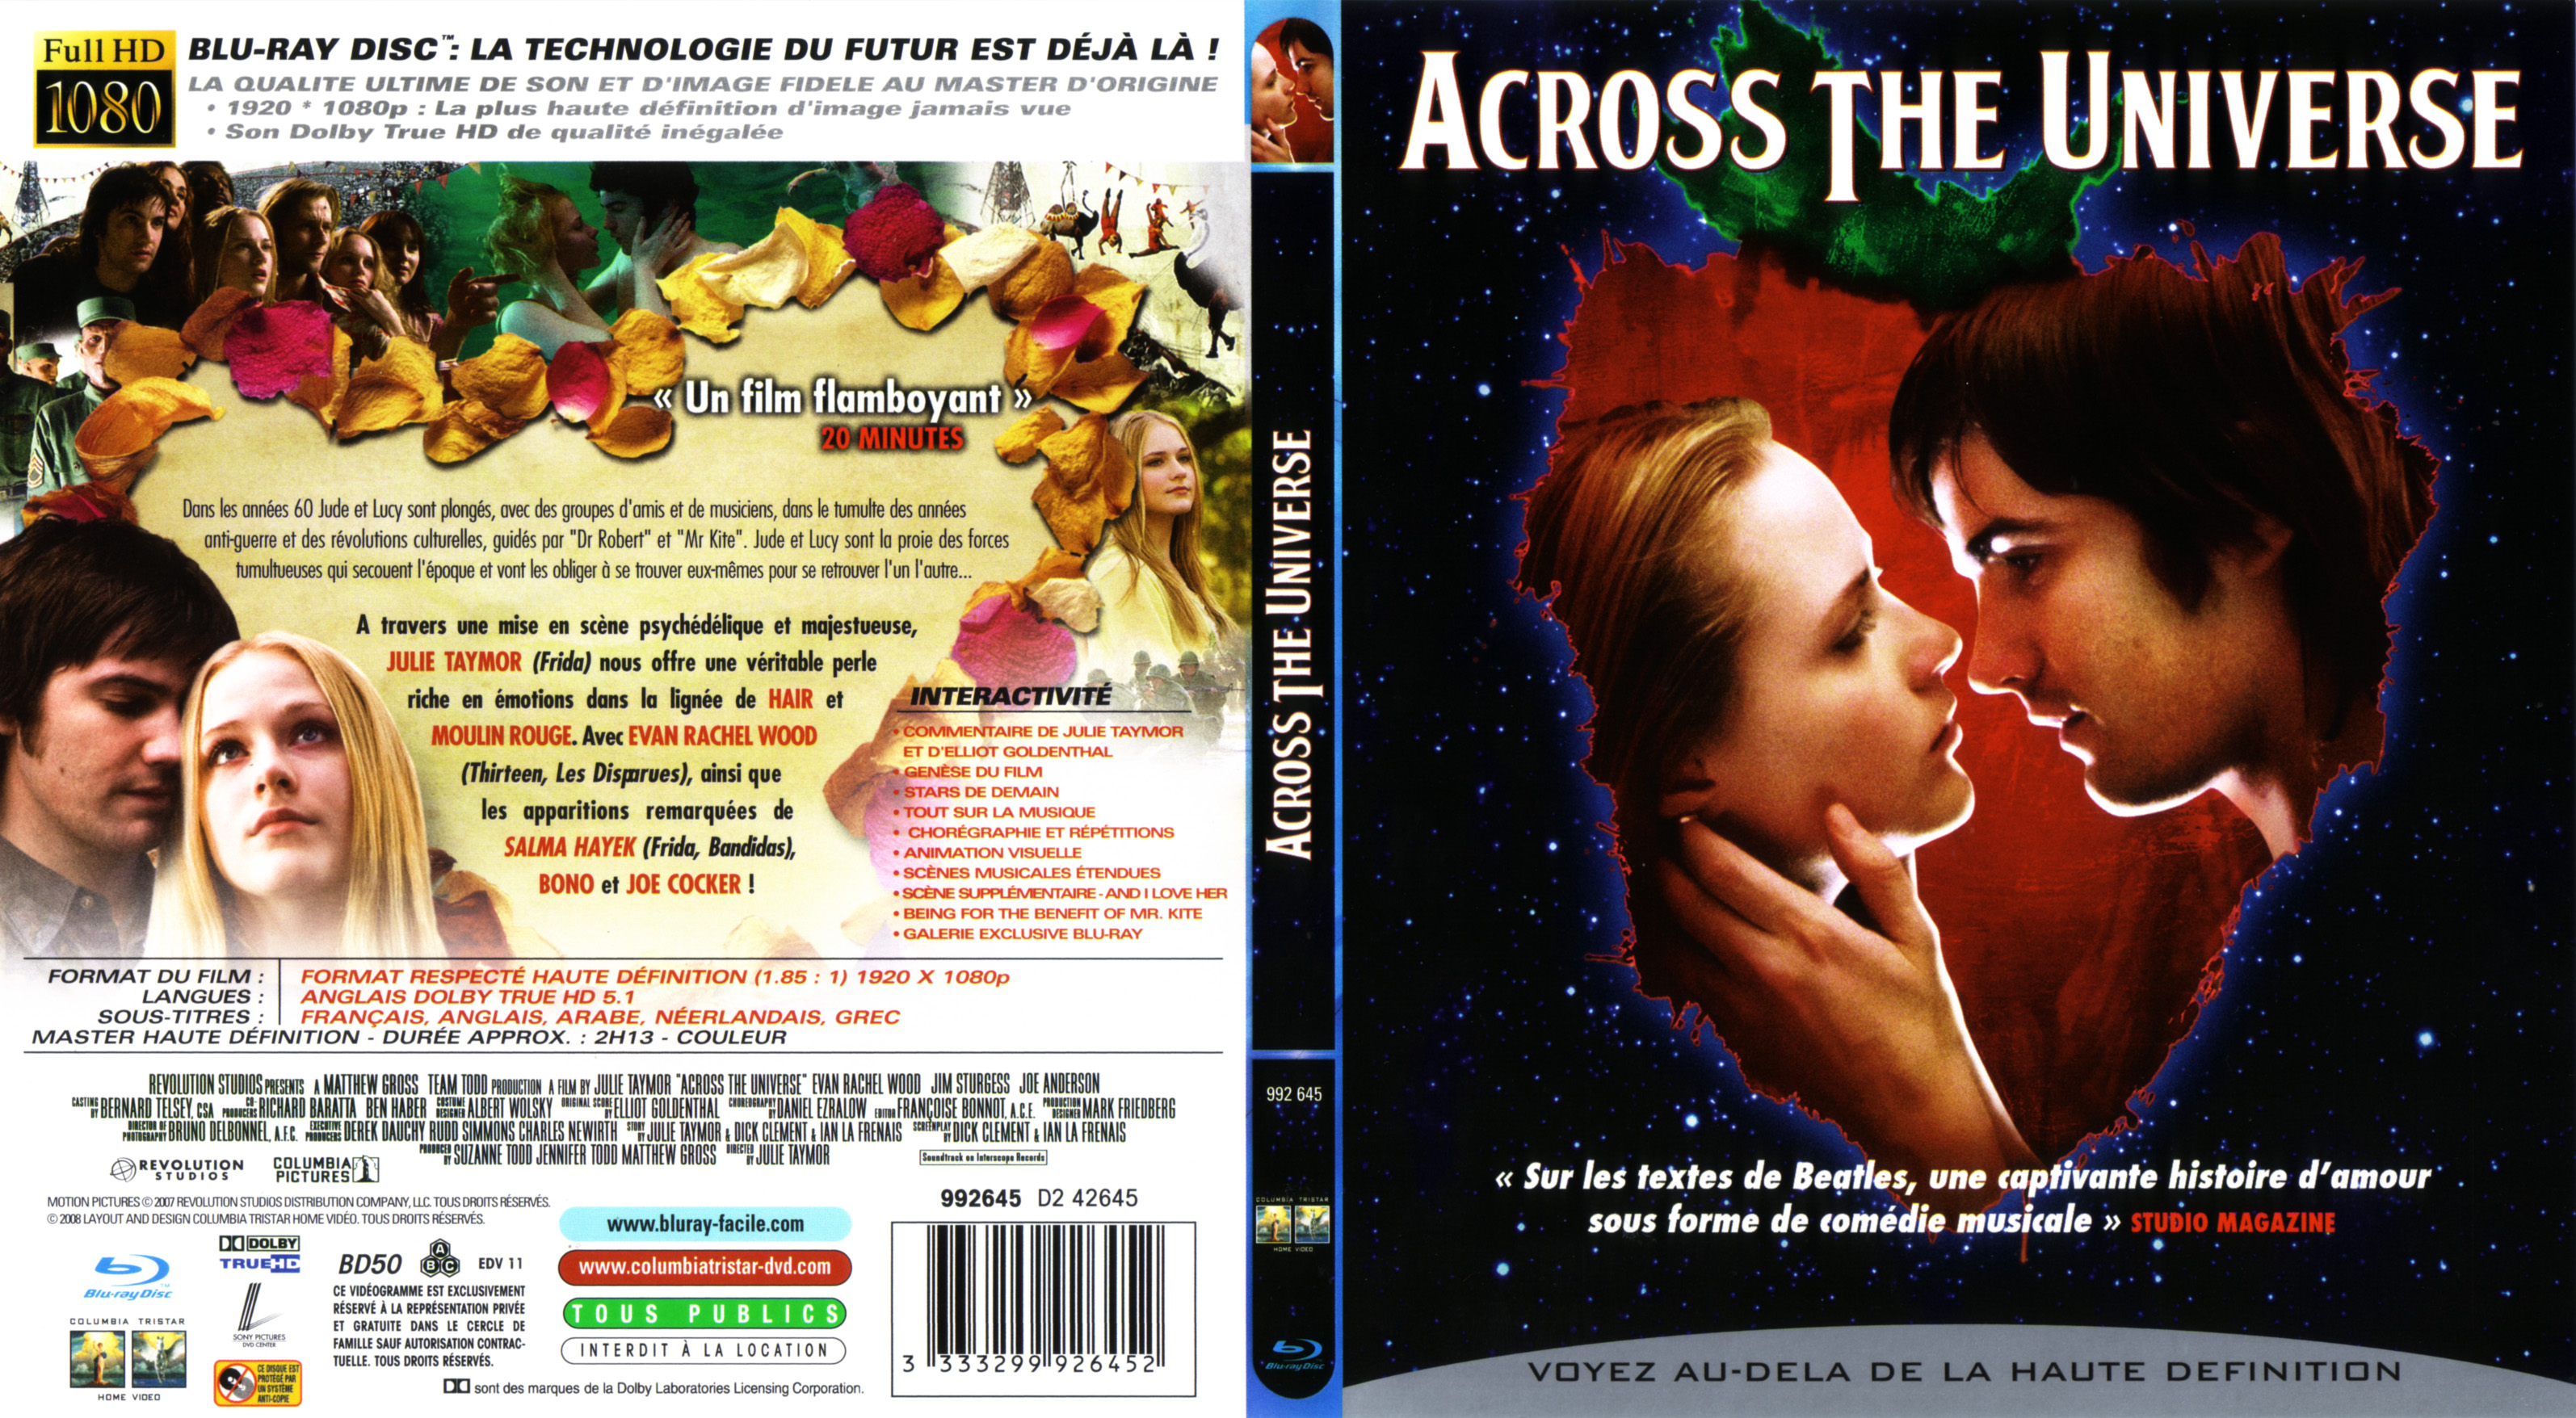 Jaquette DVD Across the universe (BLU-RAY)